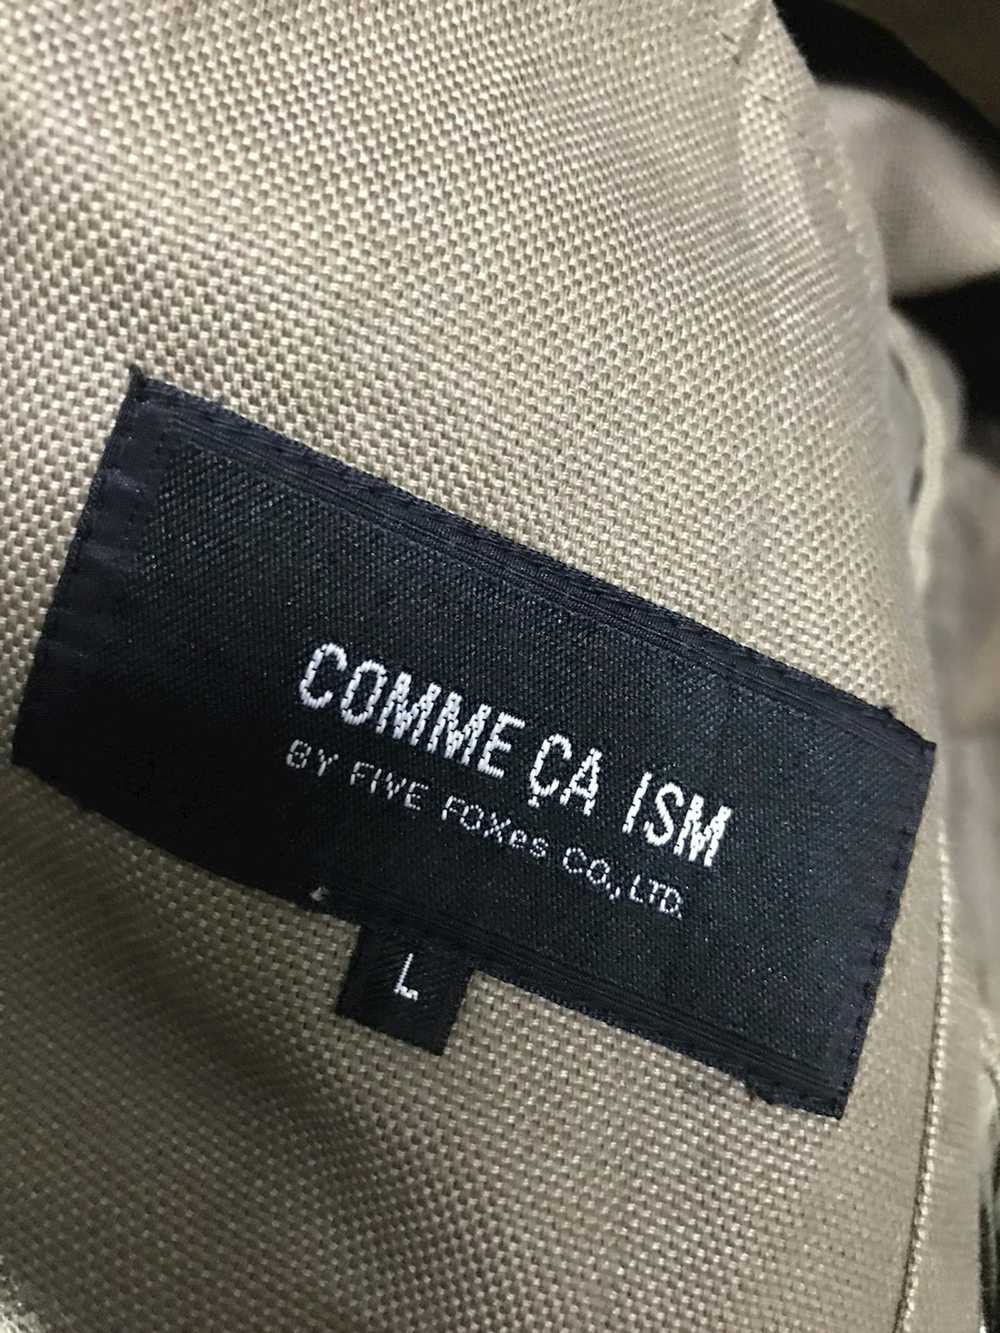 Comme Ca Ism Comme ca ism button jacket - image 3